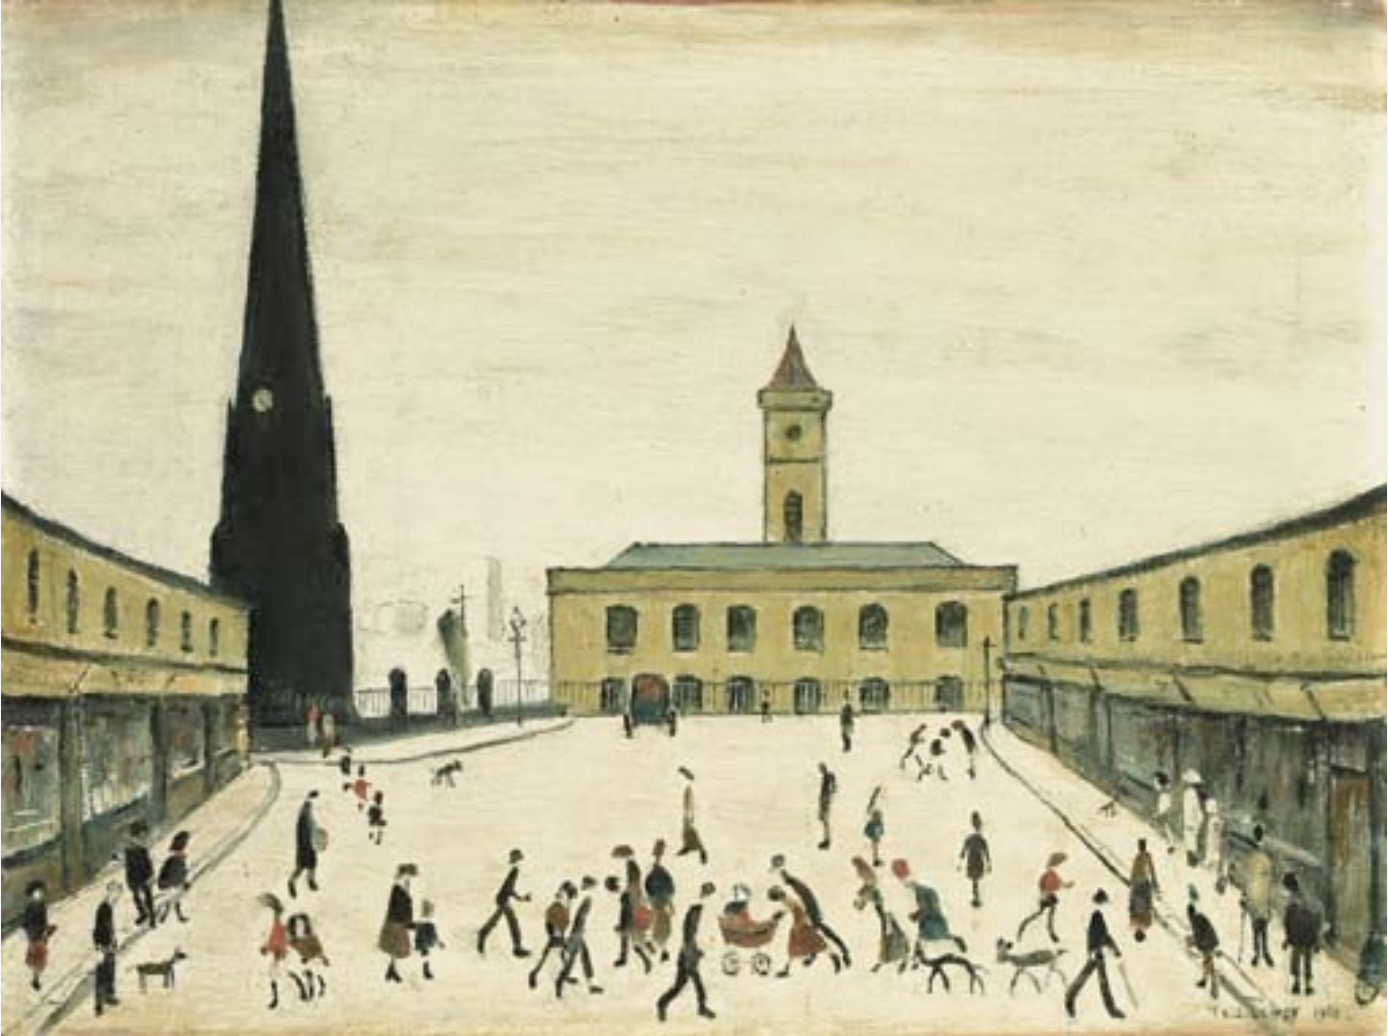 The Old Town Hall, Middlesbrough (1962) by Laurence Stephen Lowry (1887 - 1976), English artist.